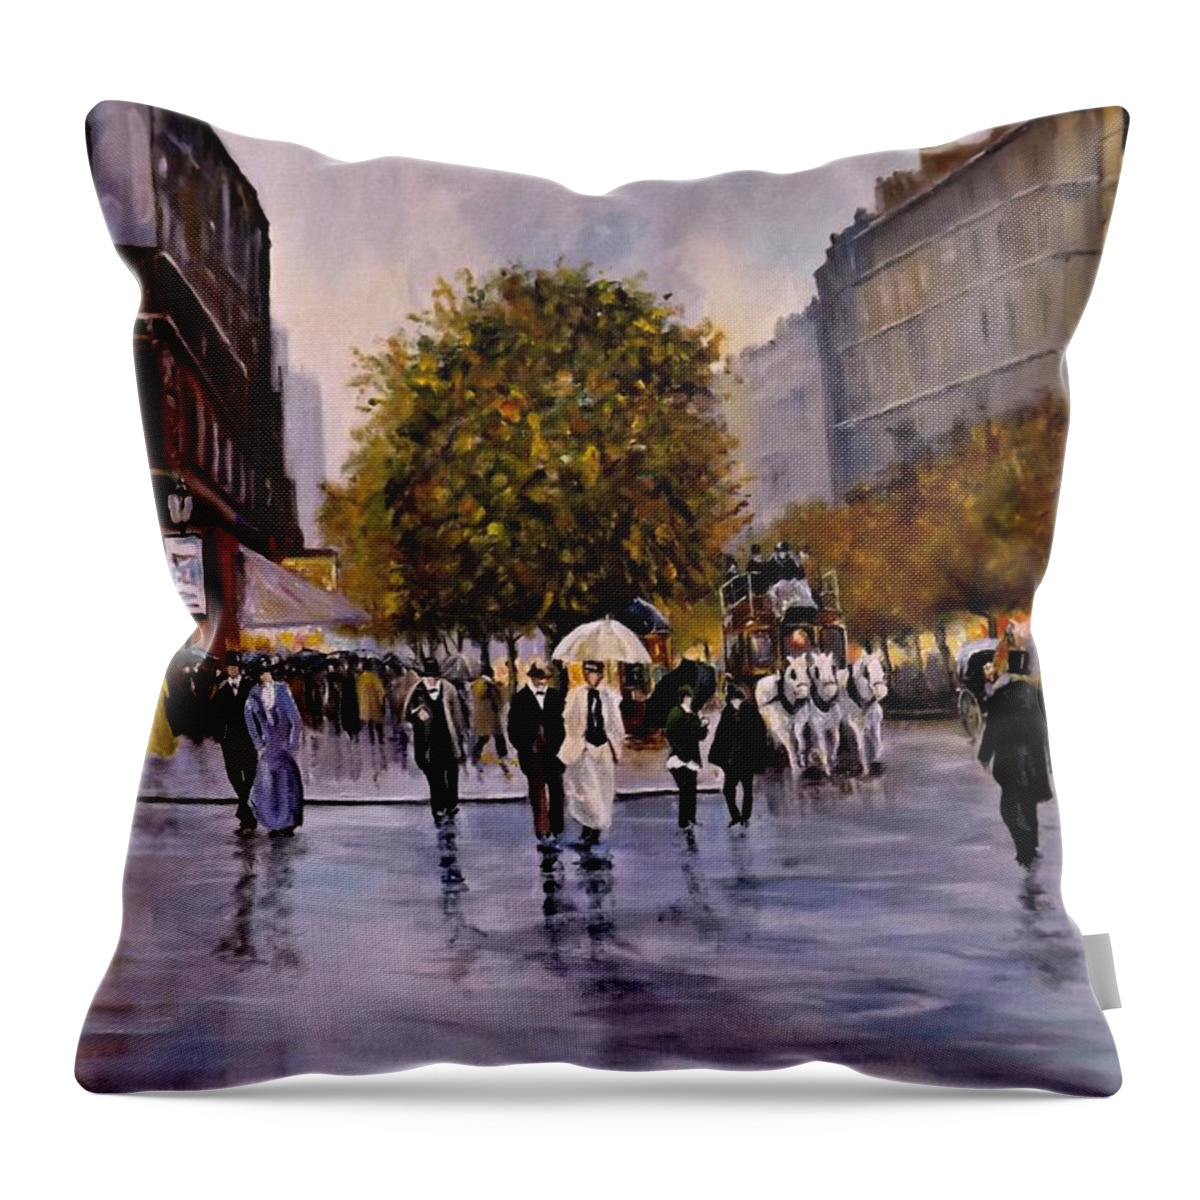 Street Scene Throw Pillow featuring the painting Wet Afternoon On The Boulevard by Barry BLAKE